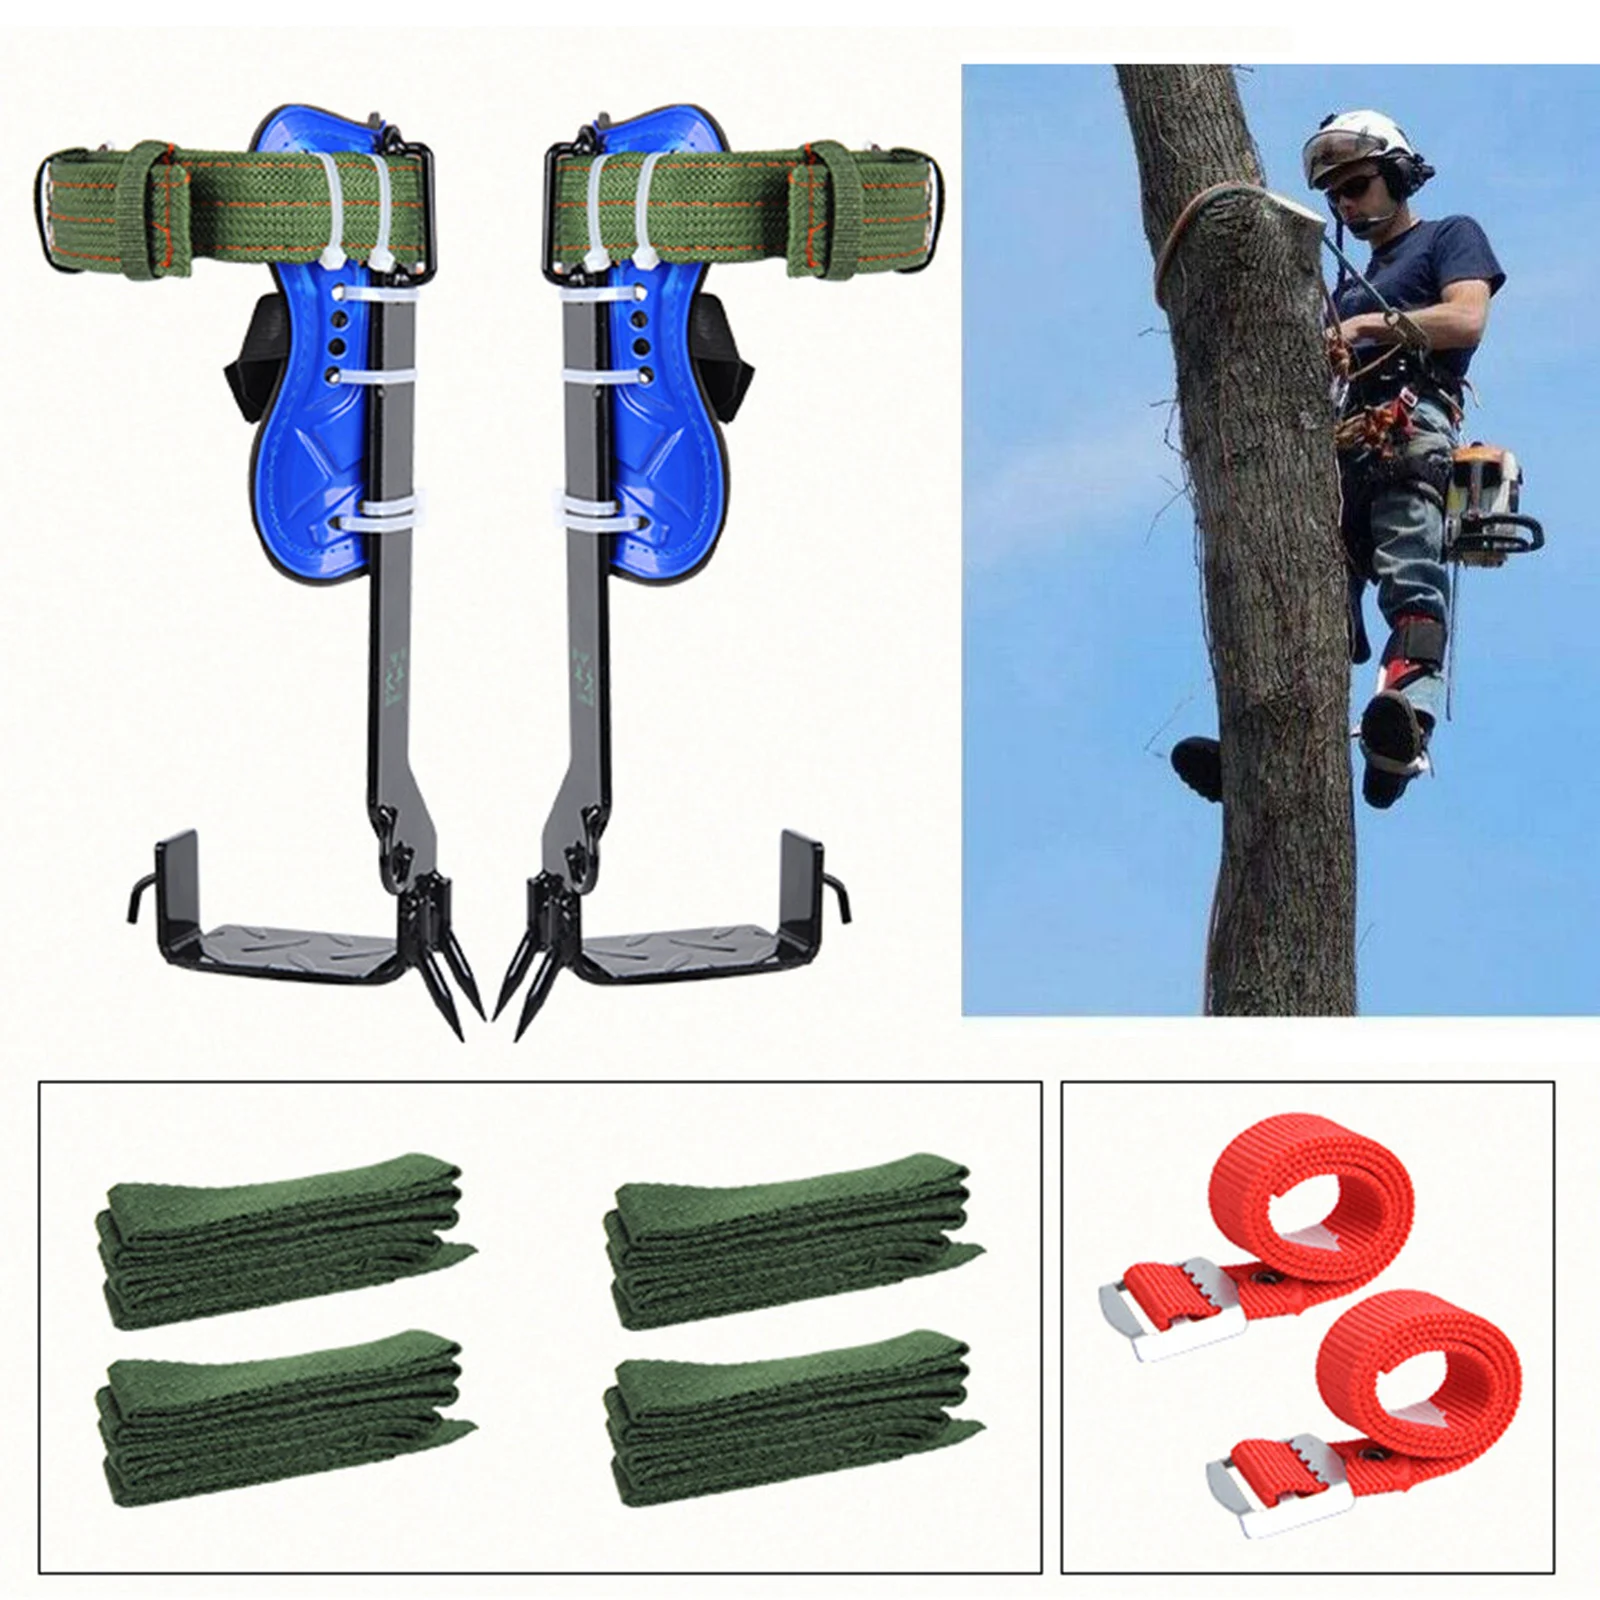 Tree Climbing Spike Set Safety Belt Adjustable Lanyard Rope Belt Stainess Steel Safety Belt Camping Accessories 2 Gears